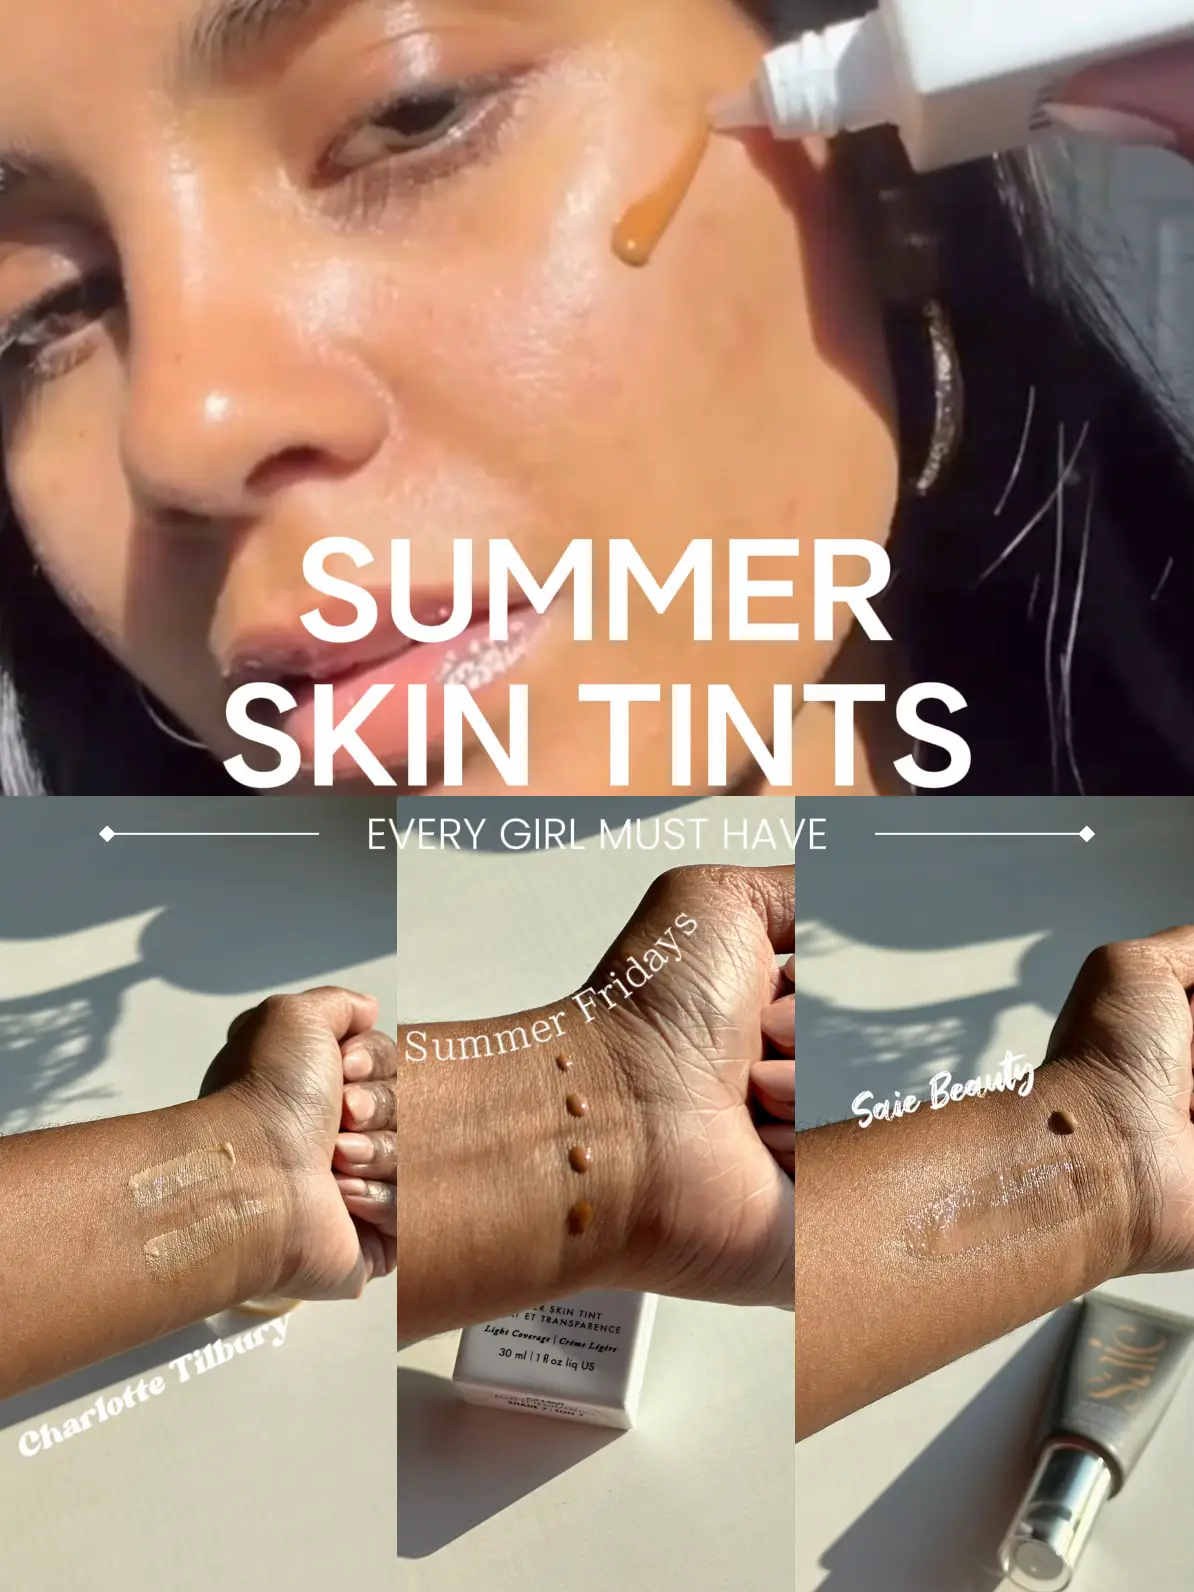 Skin Tints Are A Summer Makeup Staple